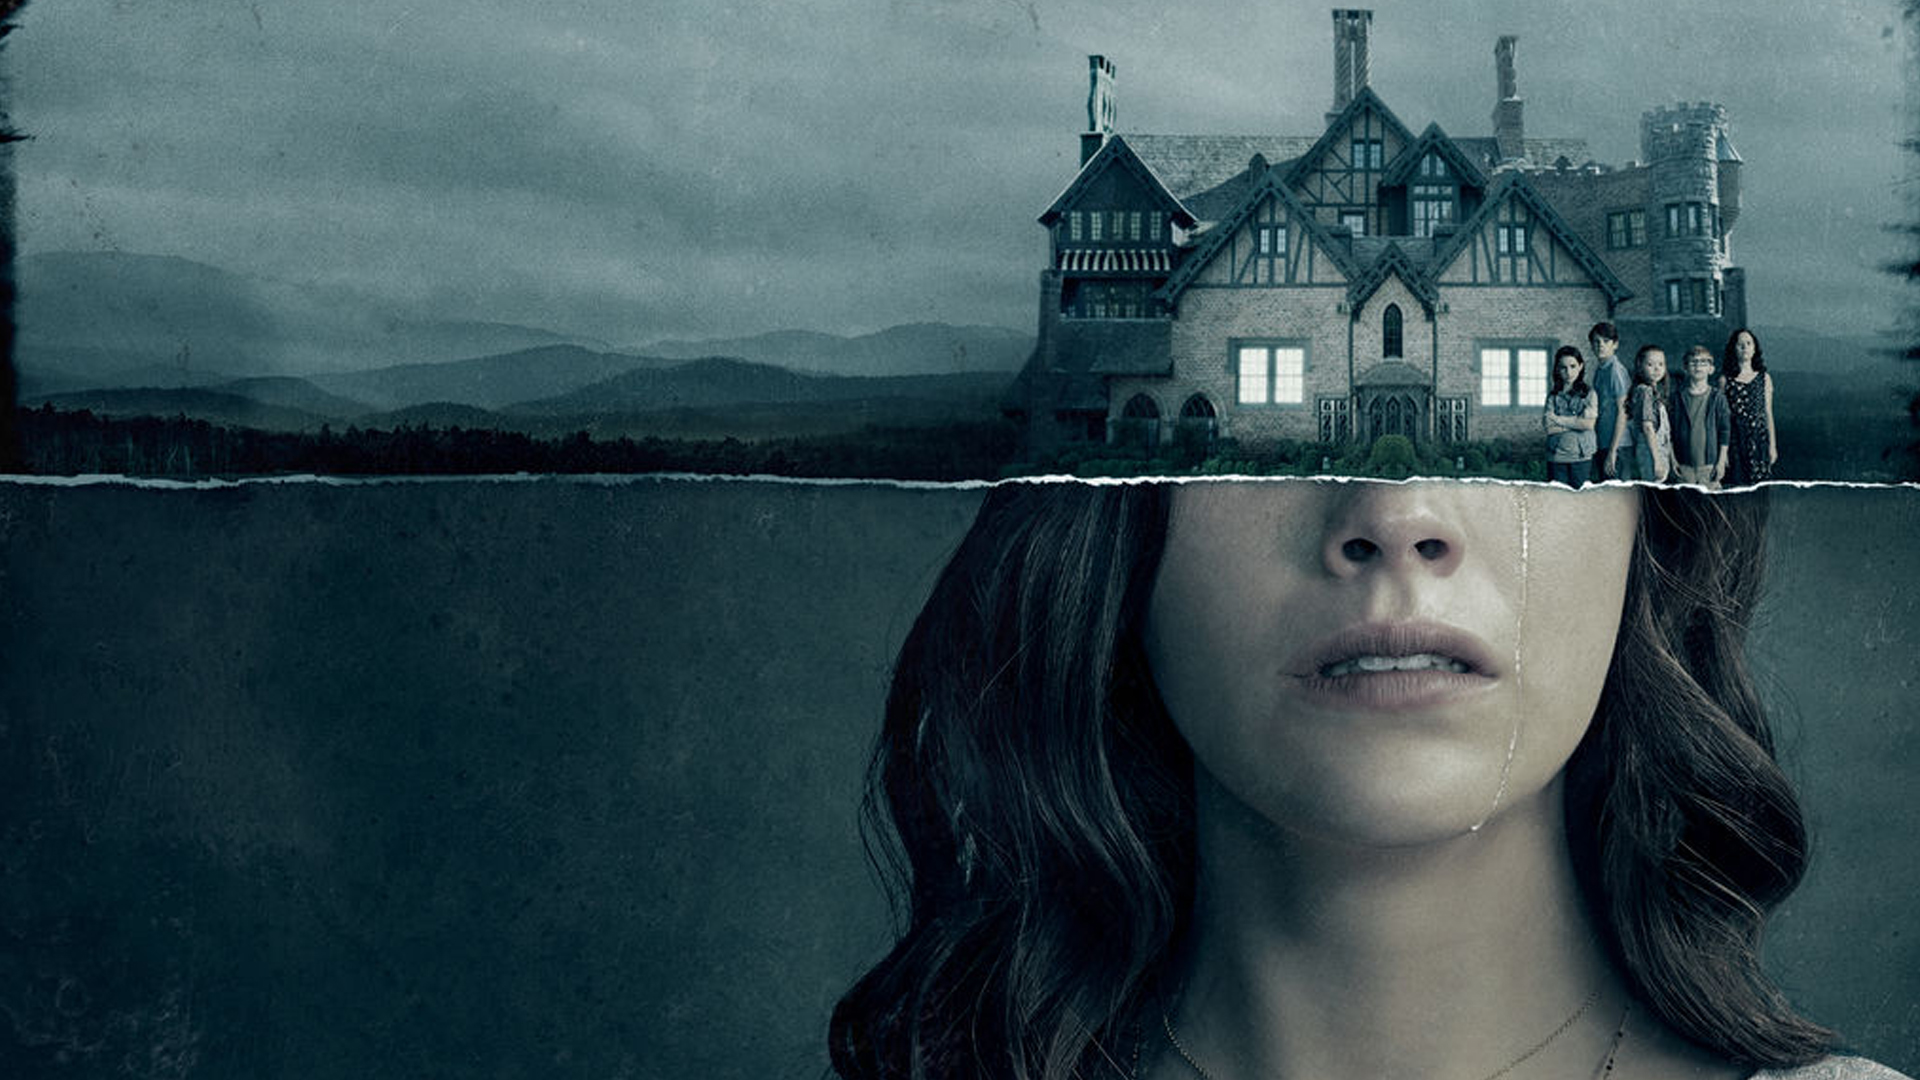 The Haunting Of Hill House Season 2 The Haunting Of Bly Manor Trailer Explained breakdown on the new netflix ghost story show in this news update on its release date news